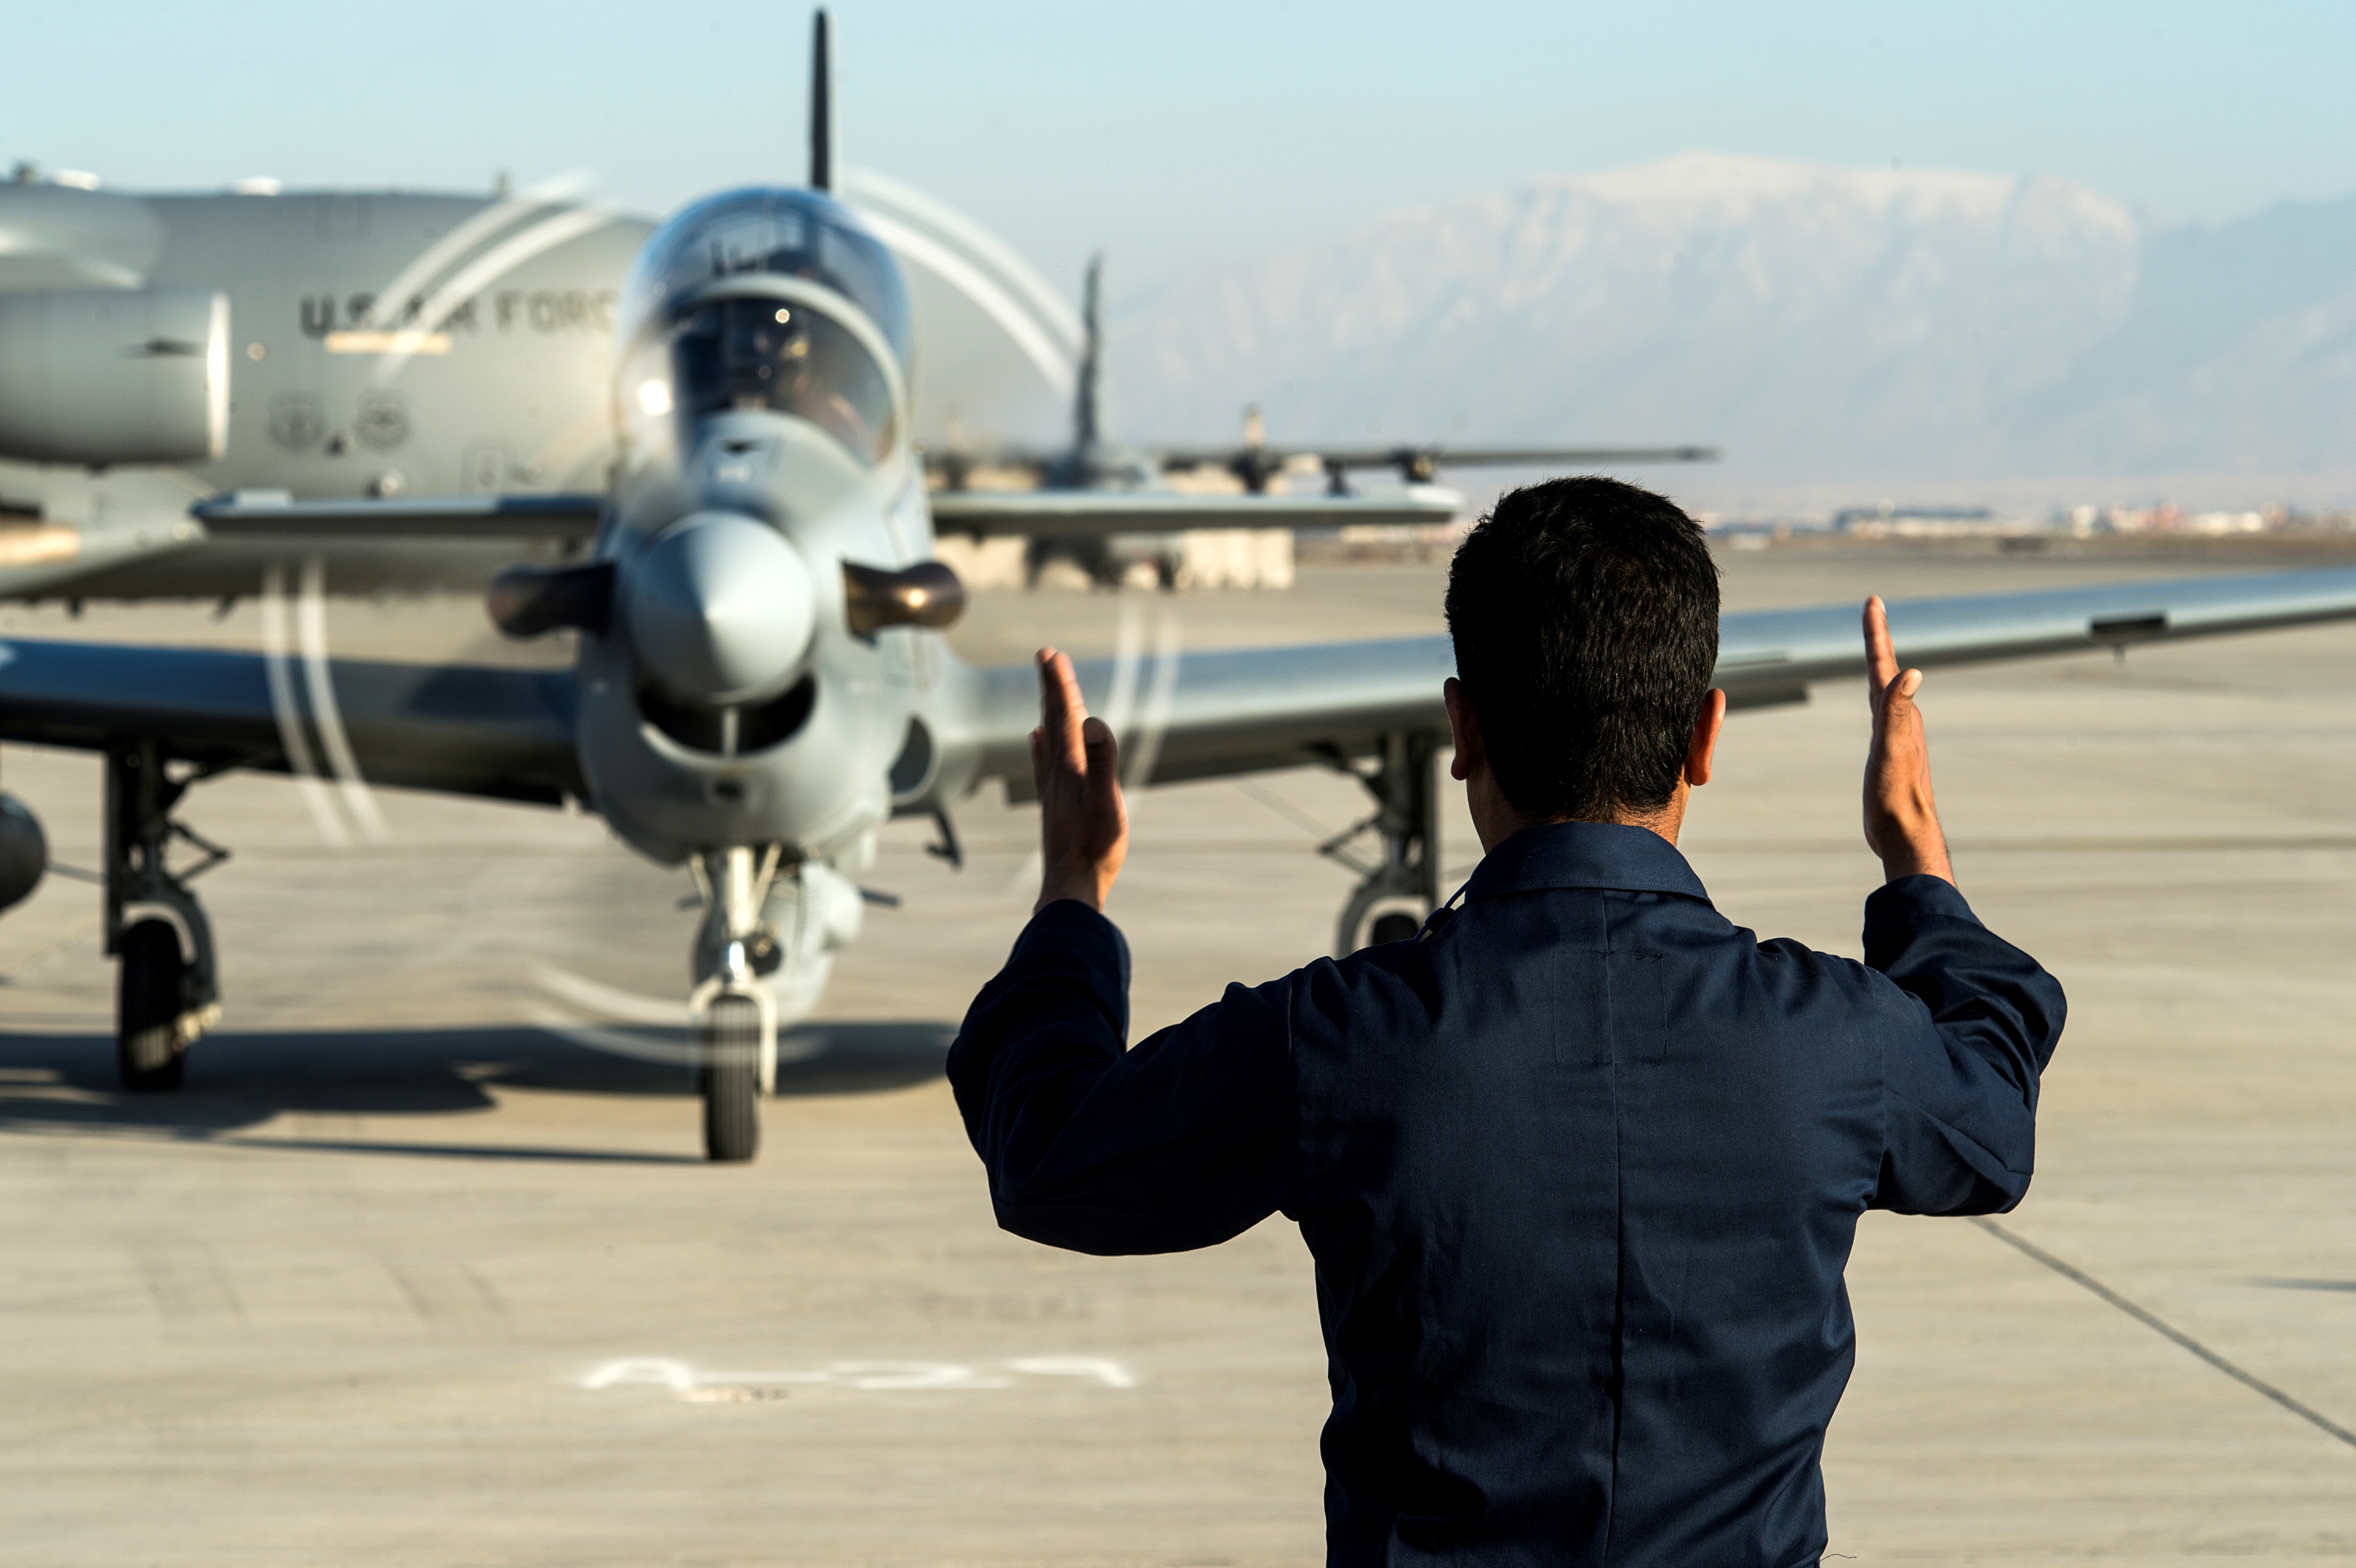 A member of the Afghan air force marshals in an A-29 Super Tucano at Hamid Karzai International Airport near Kabul, Afghanistan, January 15, 2016. Picture taken January 15, 2016. To match Special Report USA-AFGHANISTAN/PILOTS  U.S. Air Force/Tech. Sgt. Nathan Lipscomb/Handout via REUTERS/File Photo